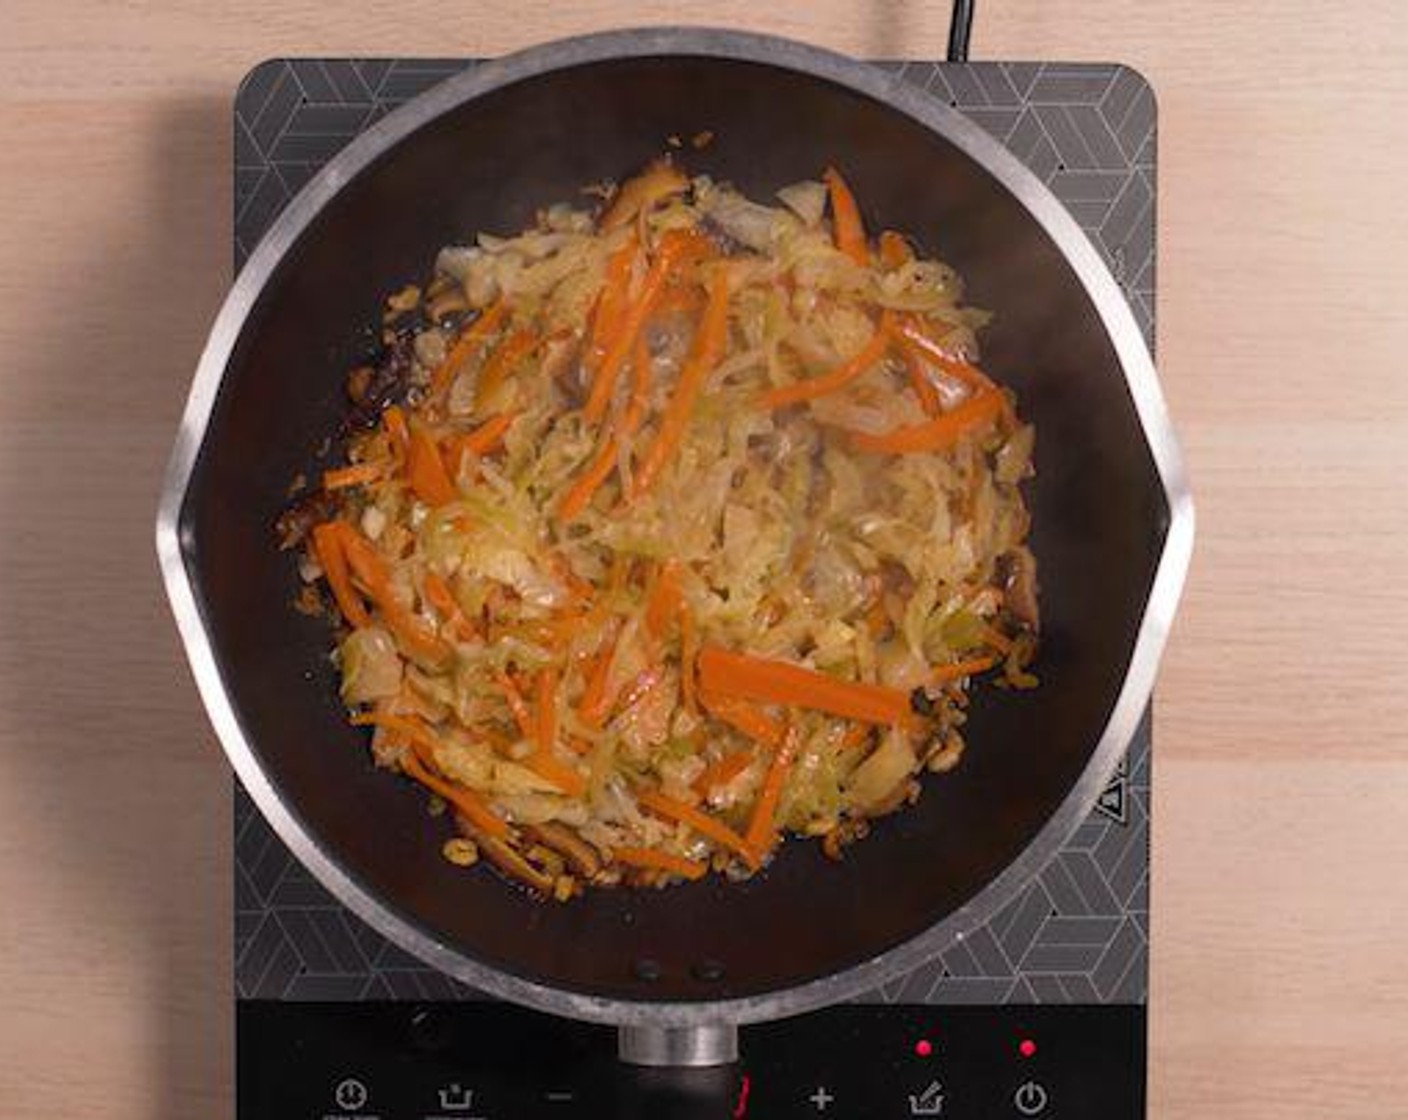 step 1 Heat Oil (2 Tbsp) in a pan. Add Dried Shrimp (1 oz) and saute till fragrant. Add Dried Mushrooms (2/3 cup) cook briefly, and pour in the Green Cabbage (5.5 oz) and Carrot (1 cup). Cook briefly.